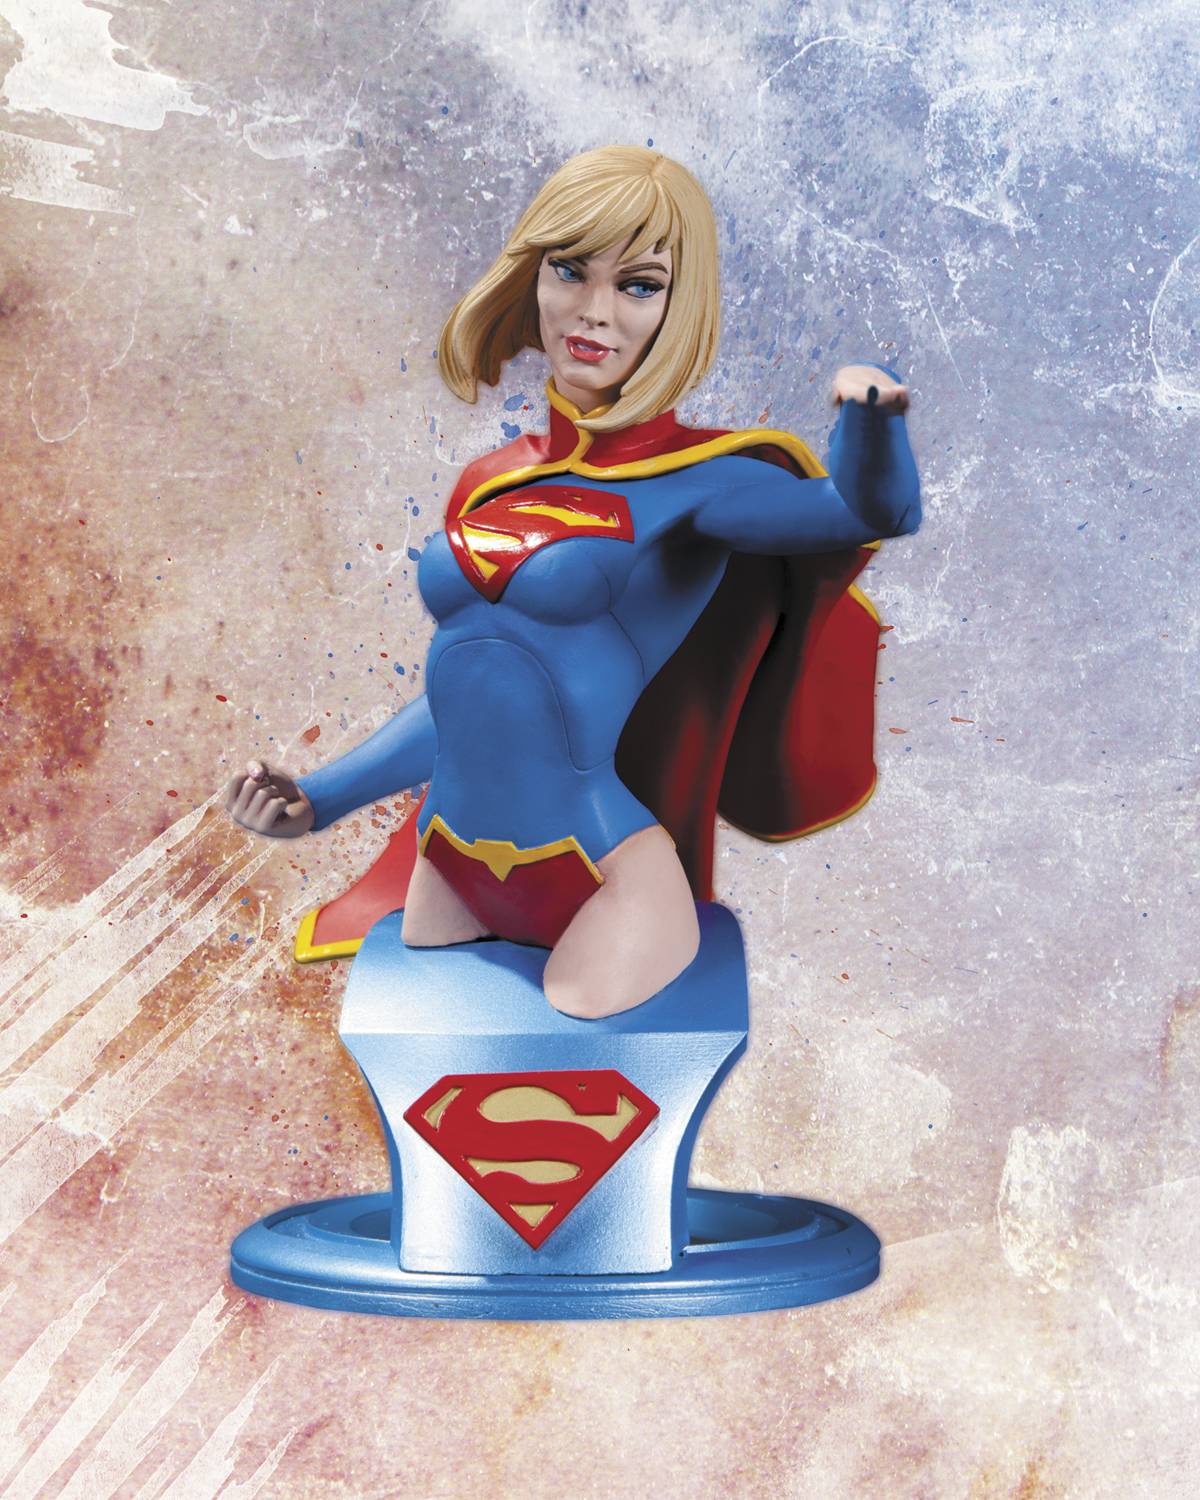 Does Supergirl's attire look better or worse without the skirt? - Quora